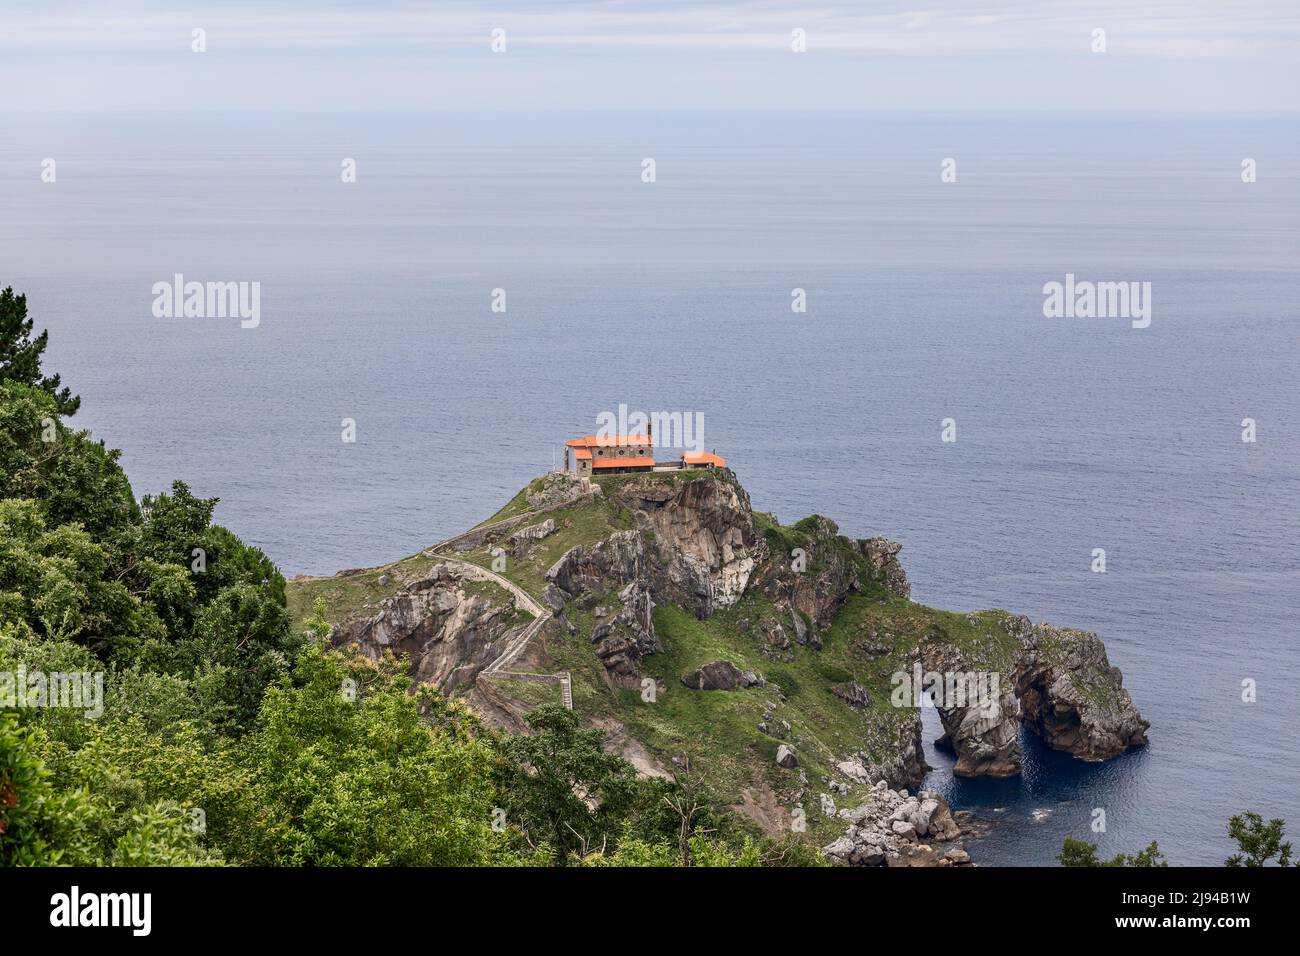 Cantabrian Sea ceaselessly erodes rocky coast creating tunnels, arches, and caves on Gaztelugatxe island with 9th-century church on 80 meters Stock Photo